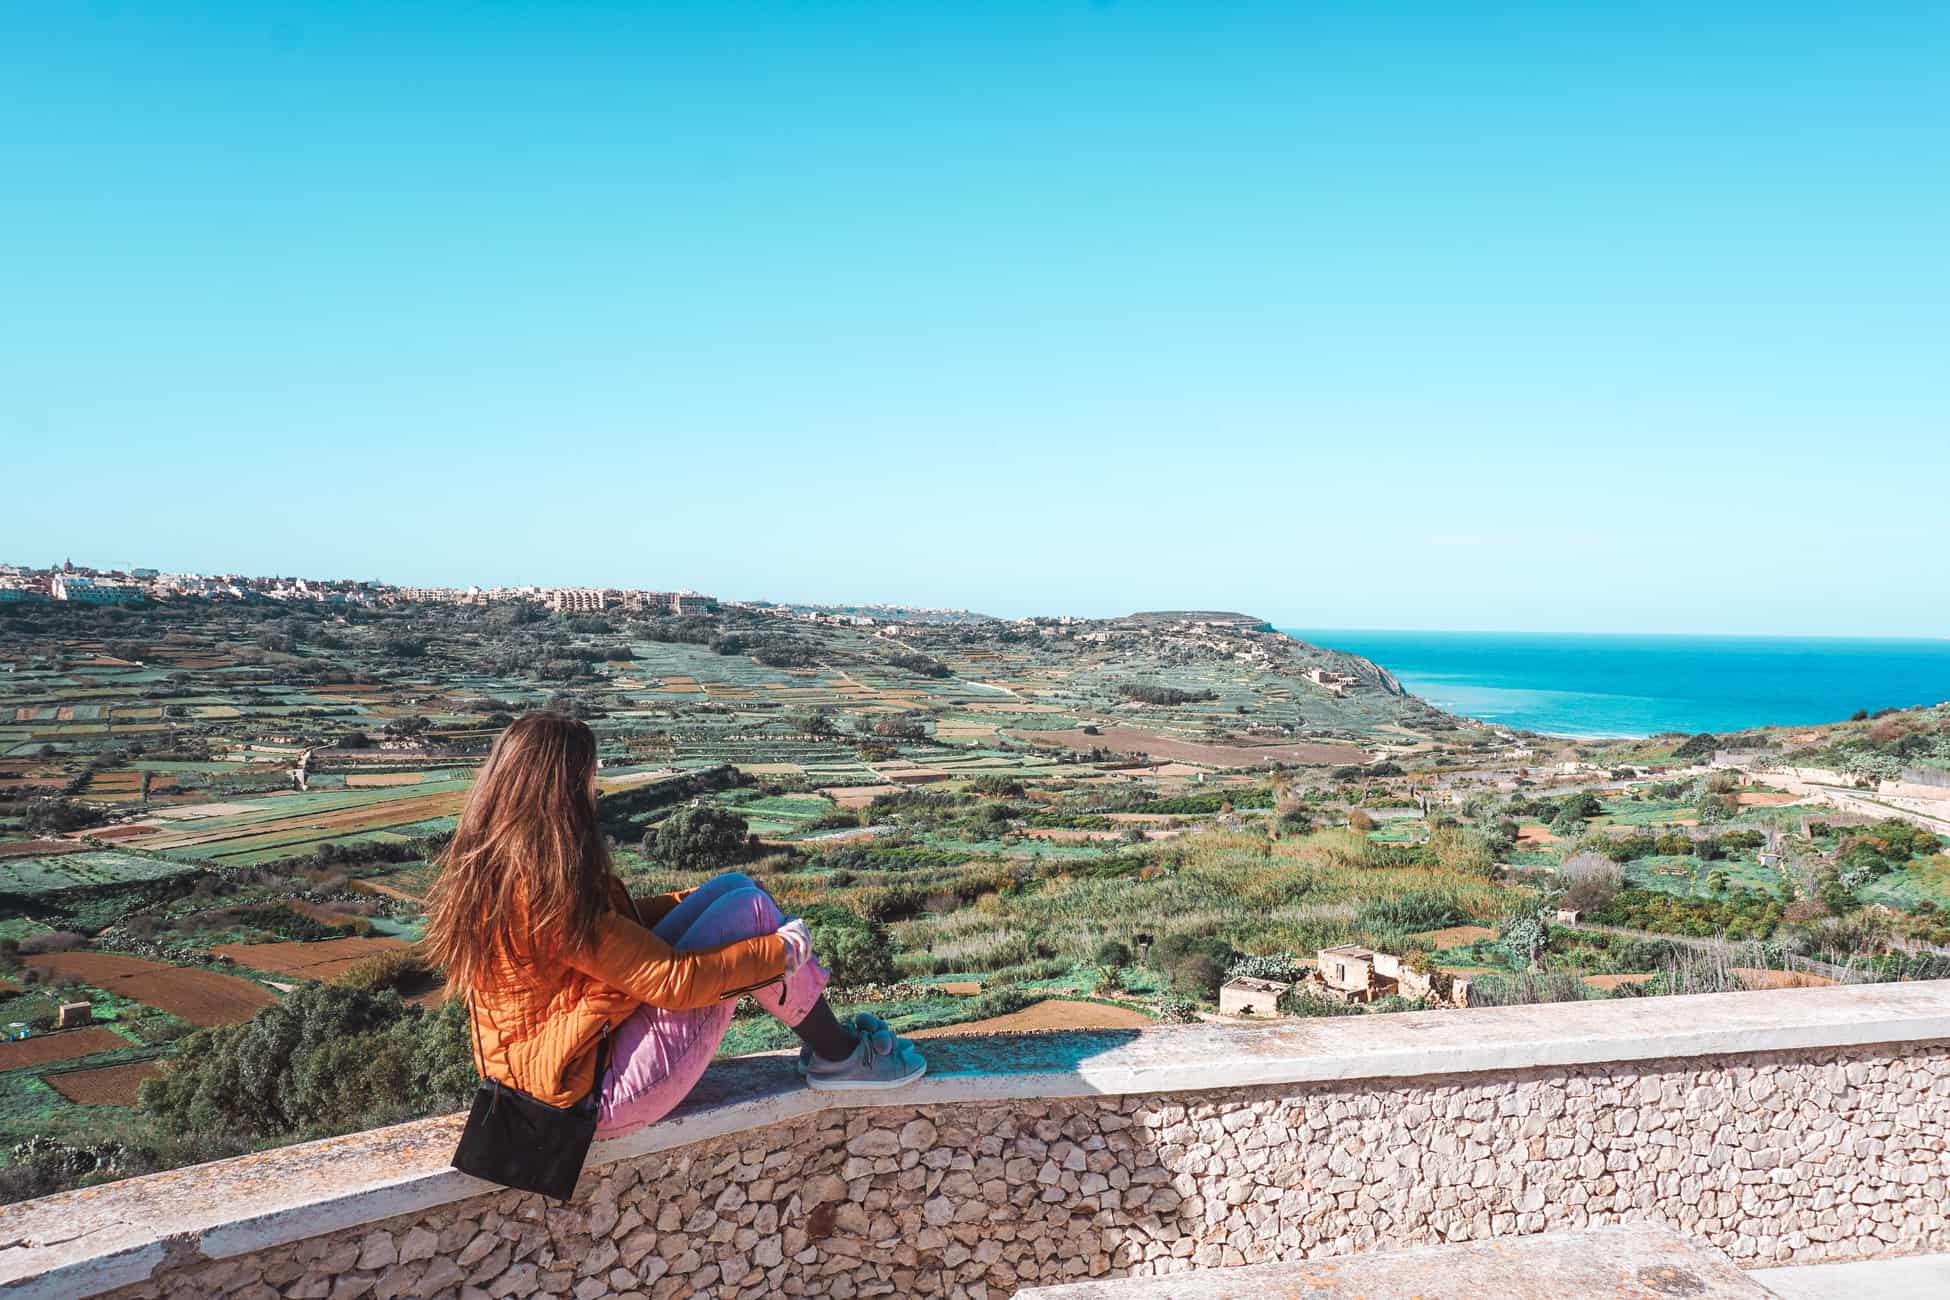 A day trip from Malta to Gozo: things to do in Gozo & itinerary